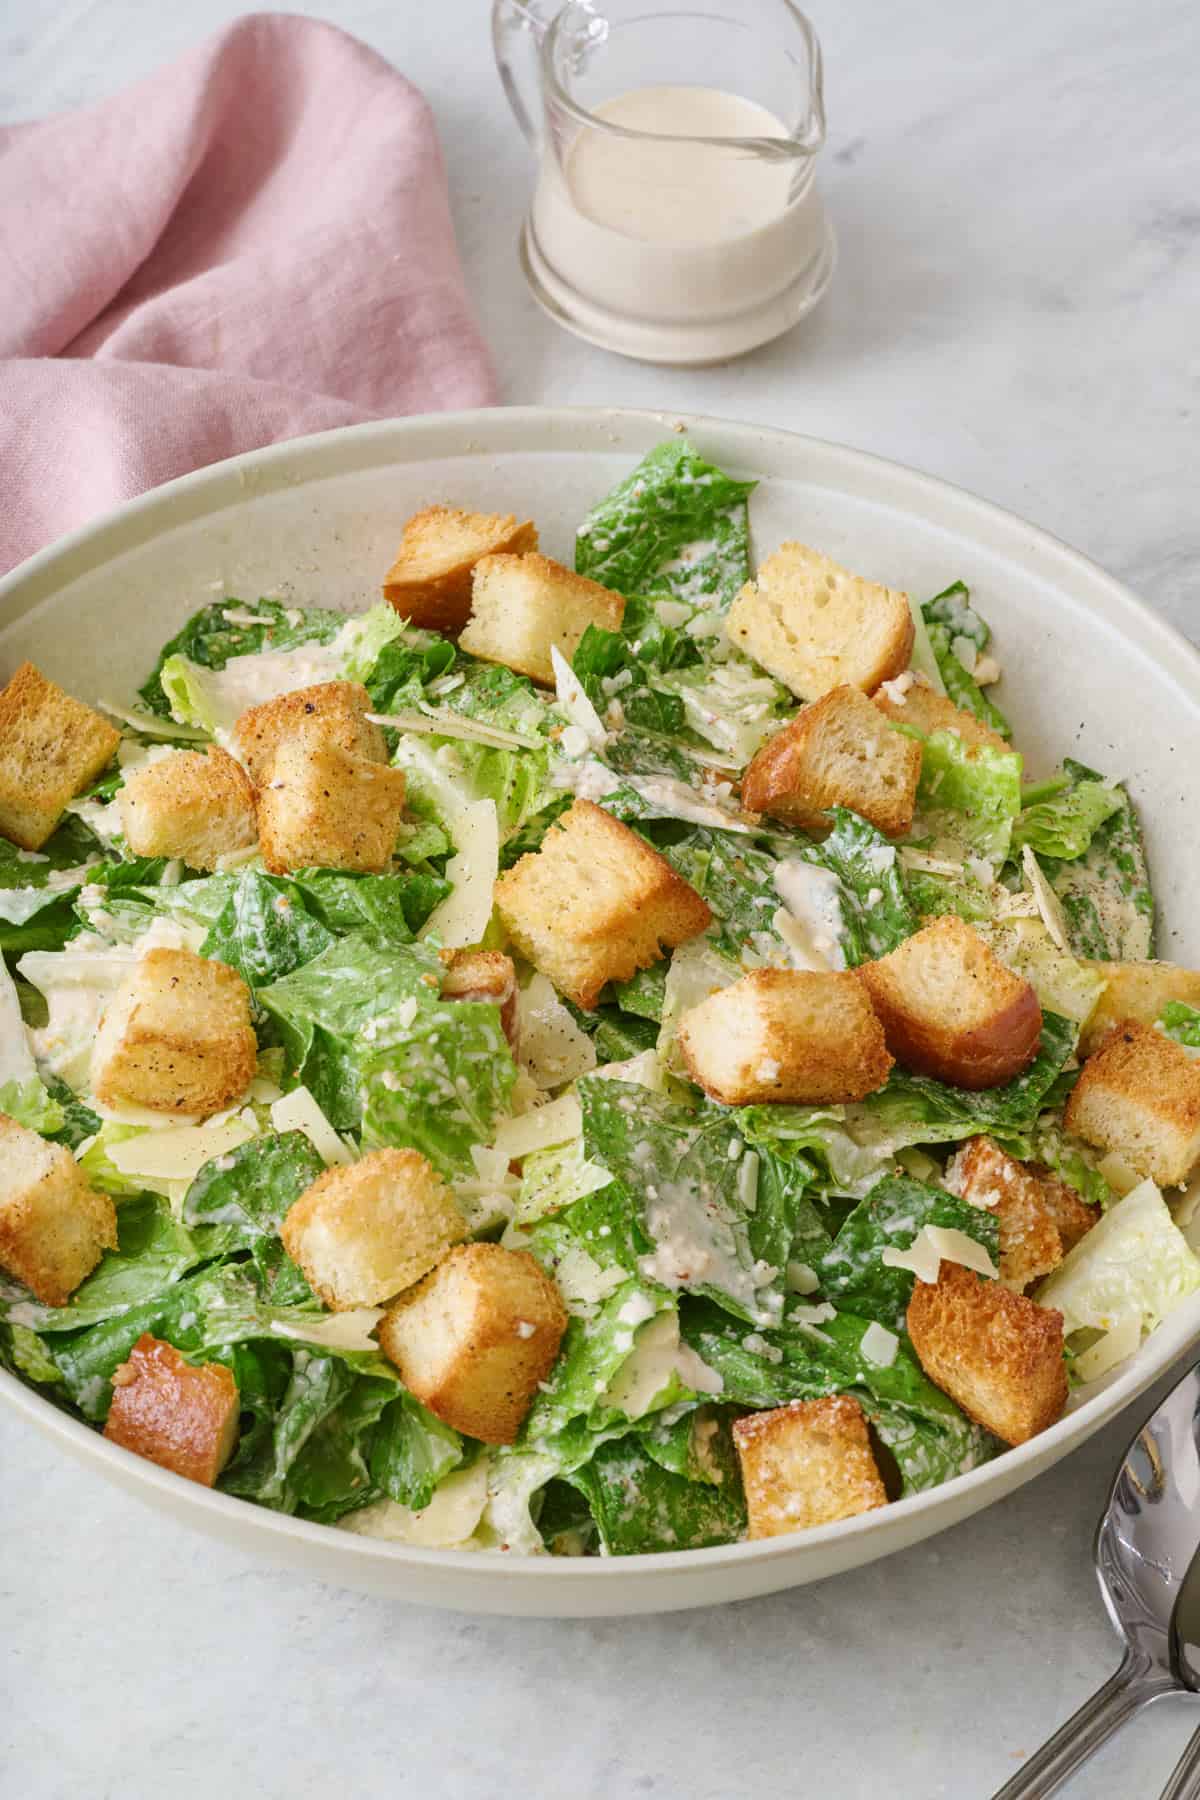 Homemade Caesar salad in a large salad bowl with an extra jar of dressing nearby.